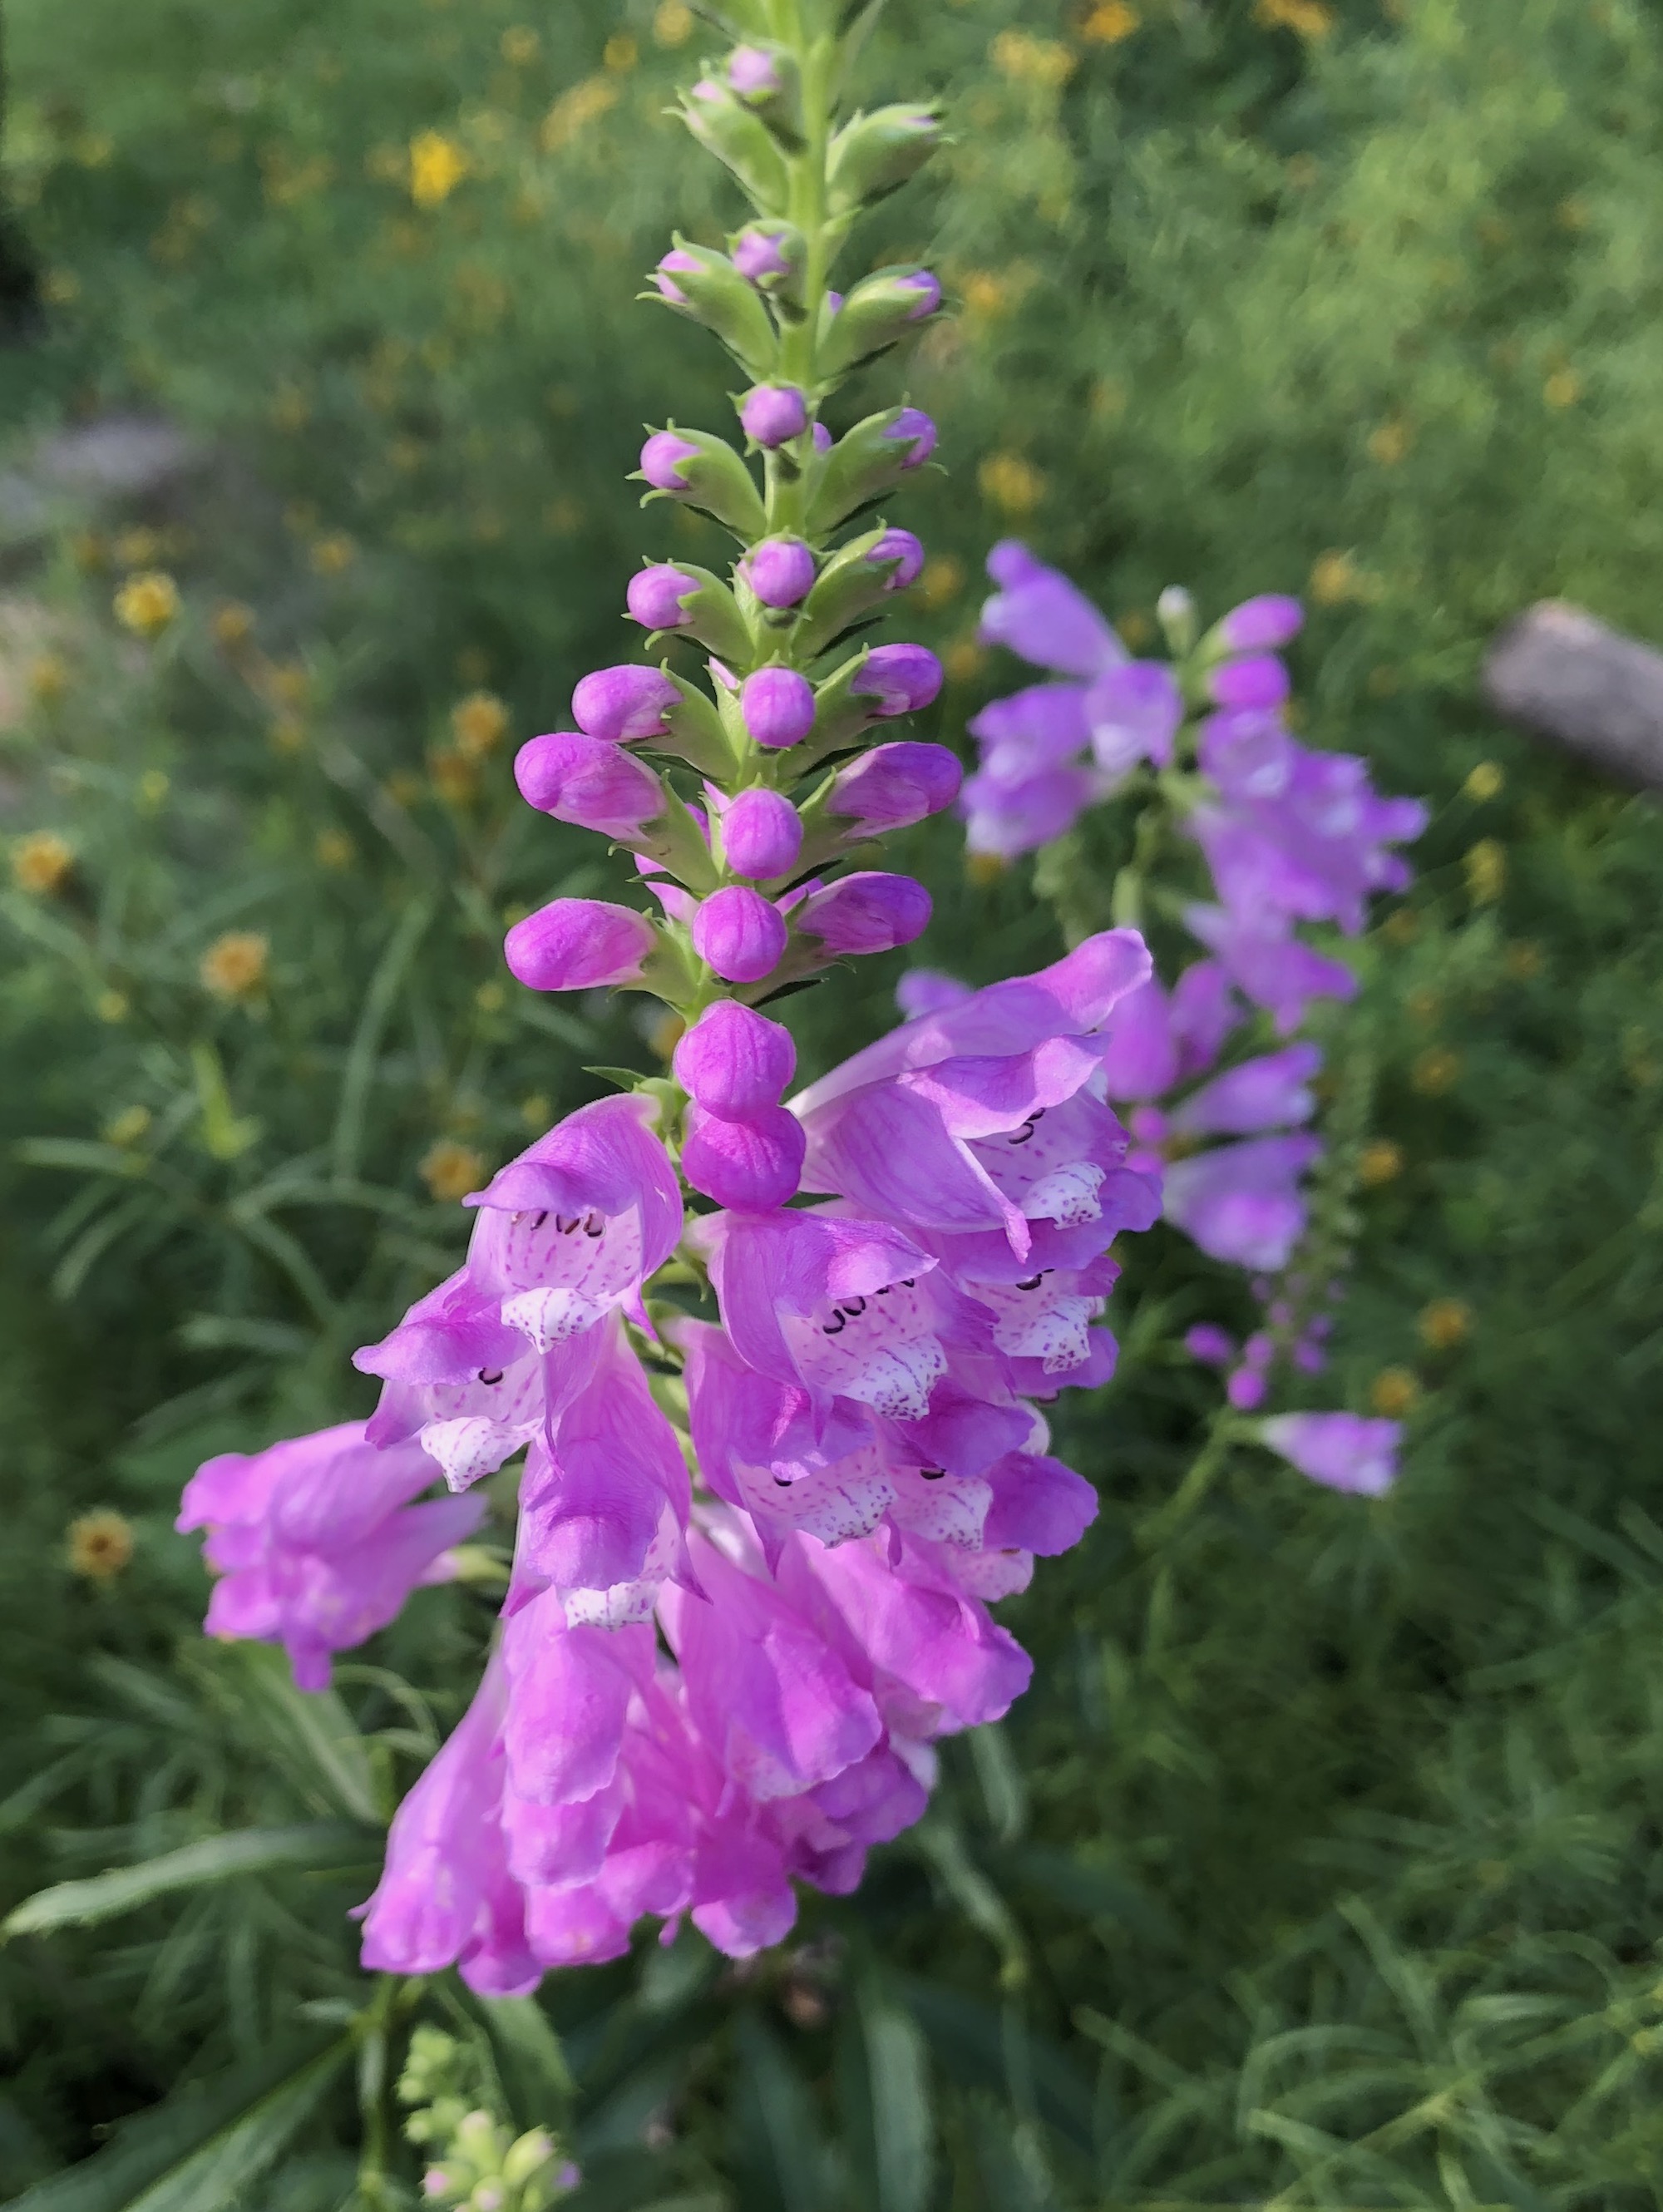 Obedient Plant near Forest Hill Cemetery in Madison, Wisconsin on August 29, 2018.